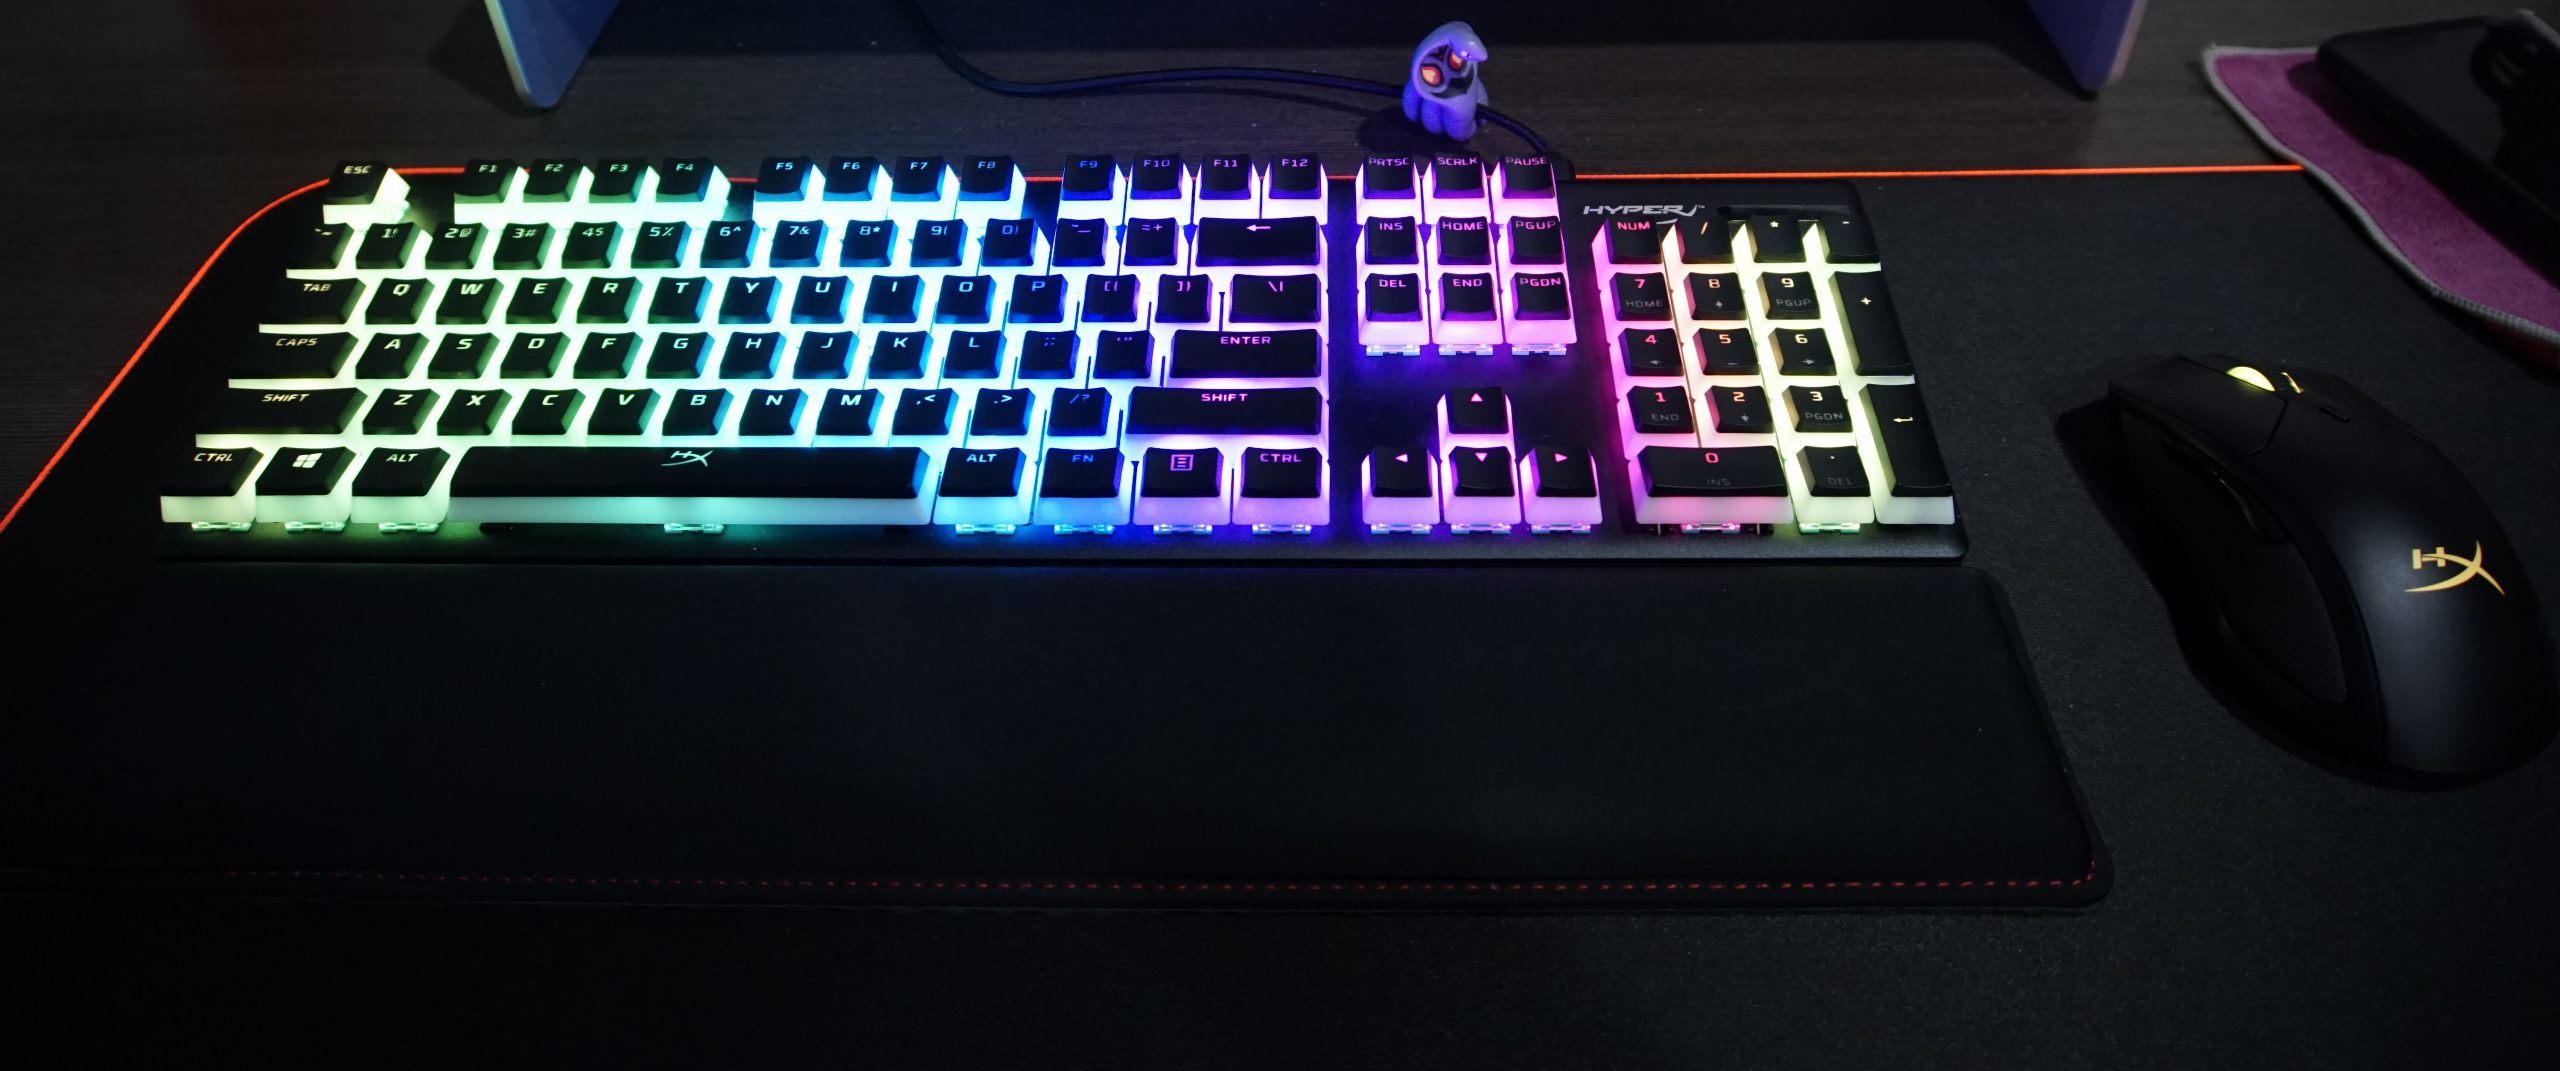 HyperX Keycaps Review Just Push